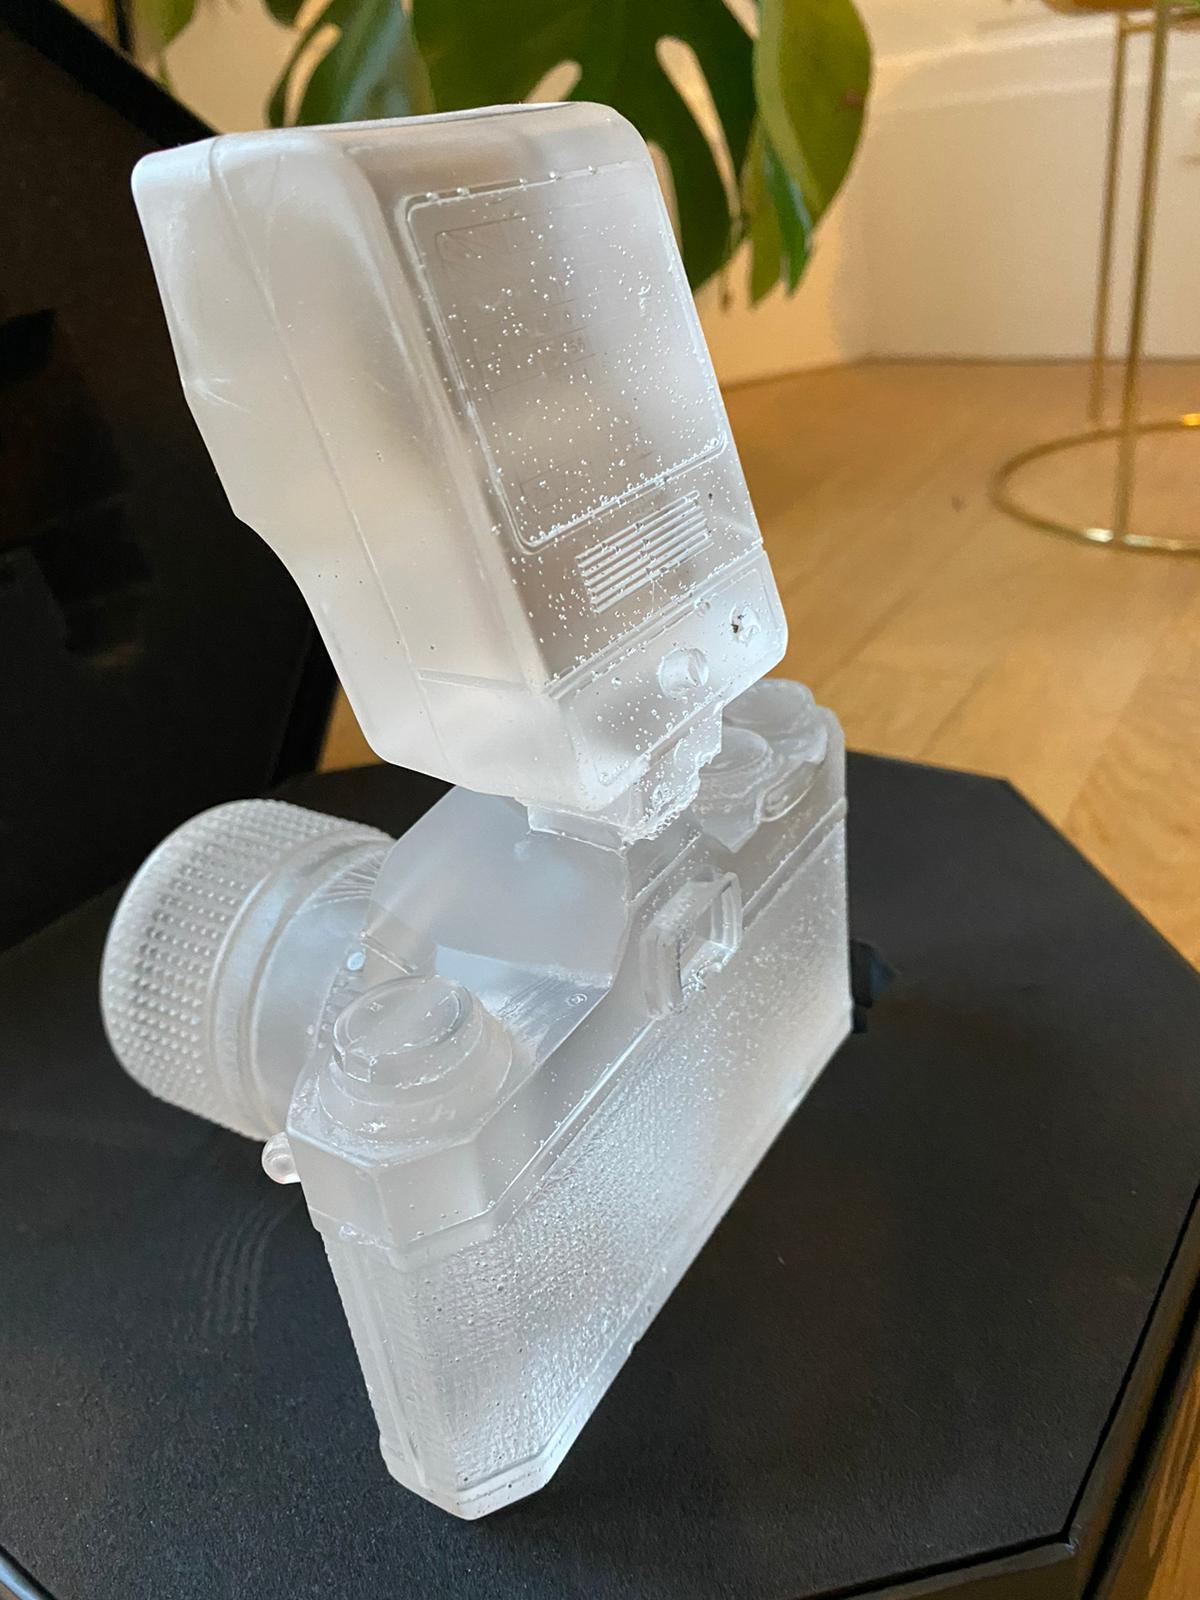 This work by Daniel Arsham is a replica of the Asahi Pentax SP1000 reflex camera, the first that the artist used in his early photographic practices. These Crystal Relic series are made of cast resin making each object translucent to light and have